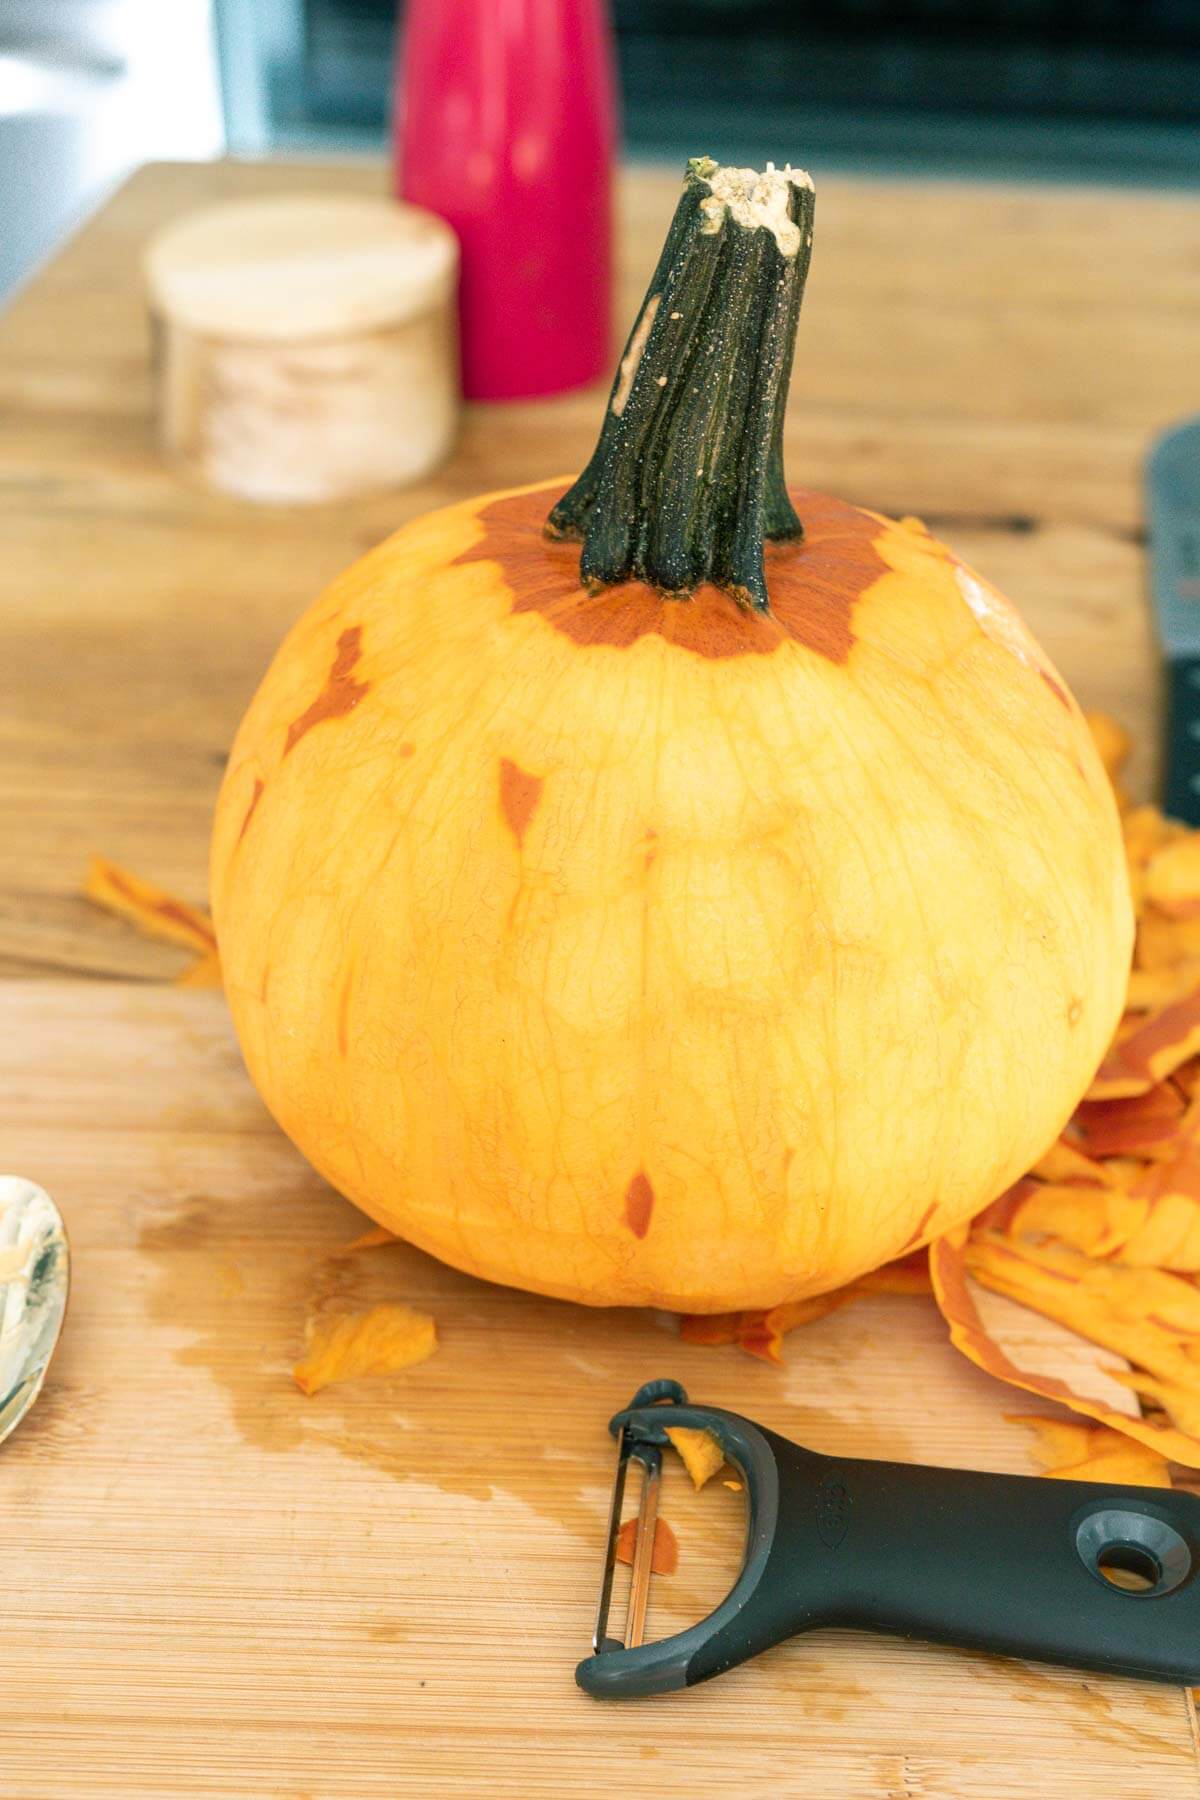 a small pie pumpkin peeled with a vegetable peeler